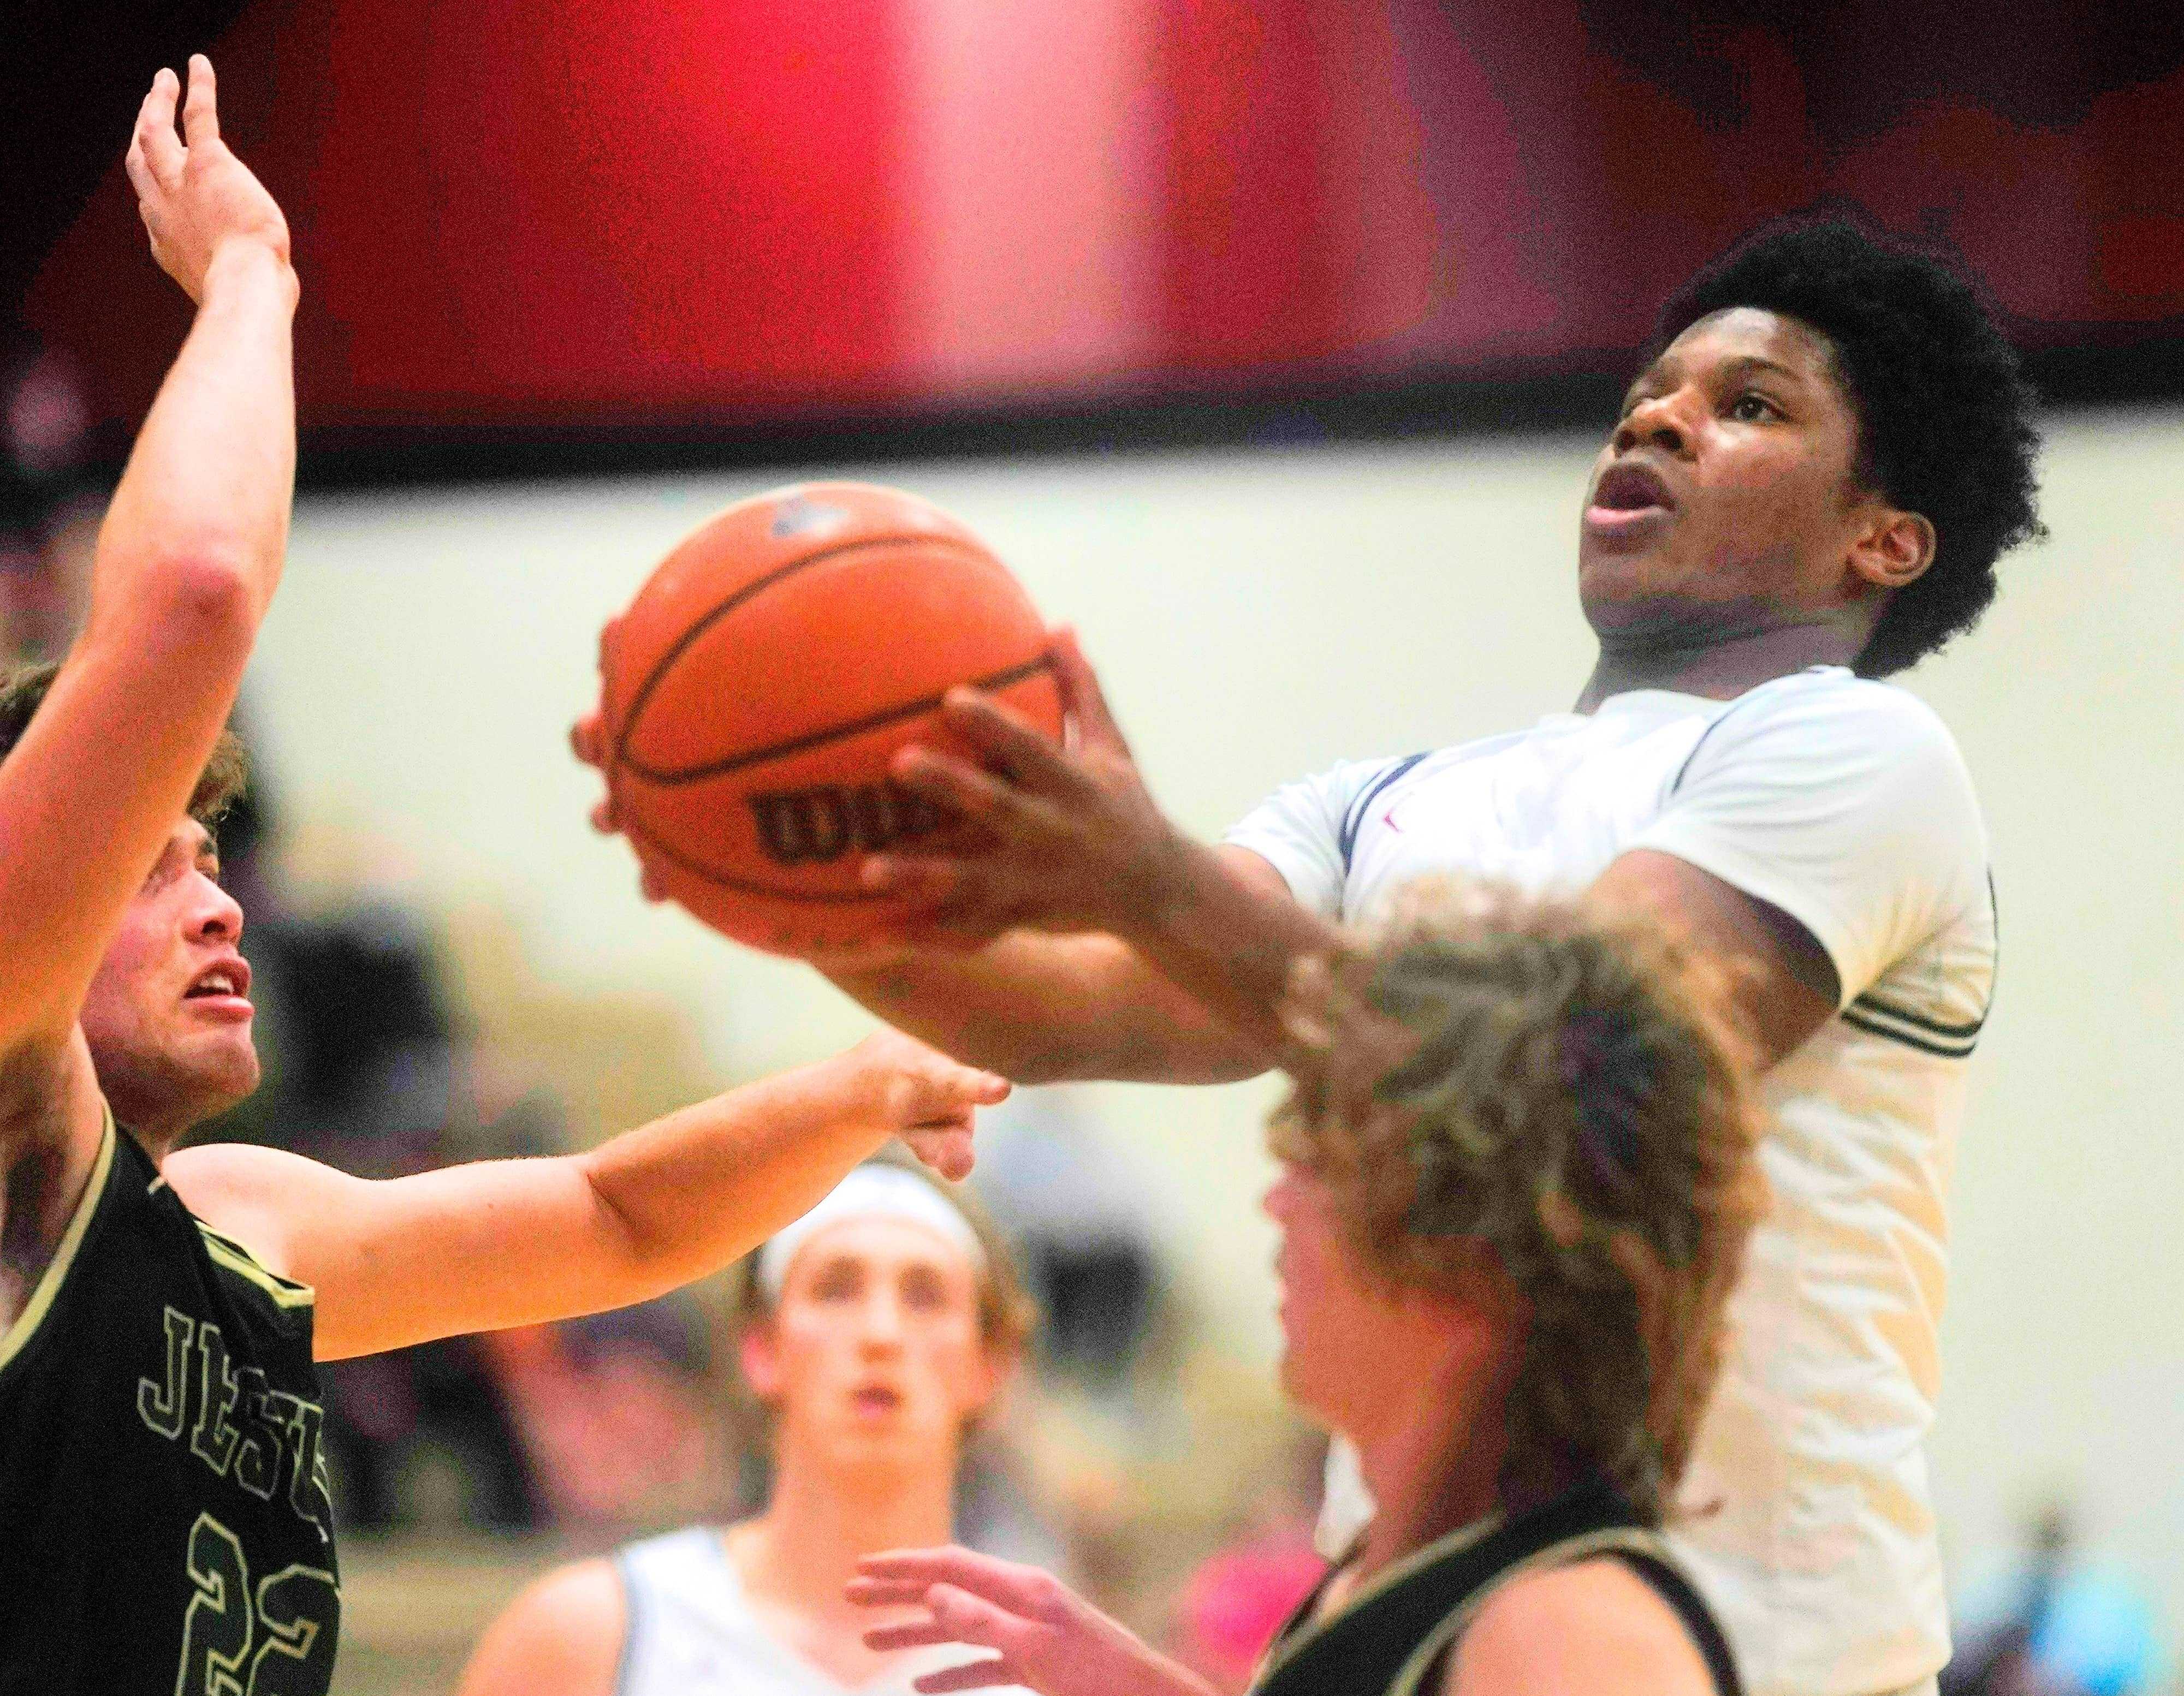 Tualatin senior guard Malik Ross, a third-year starter, is averaging 14.8 points and 5.6 rebounds. (Photo by Jon Olson)